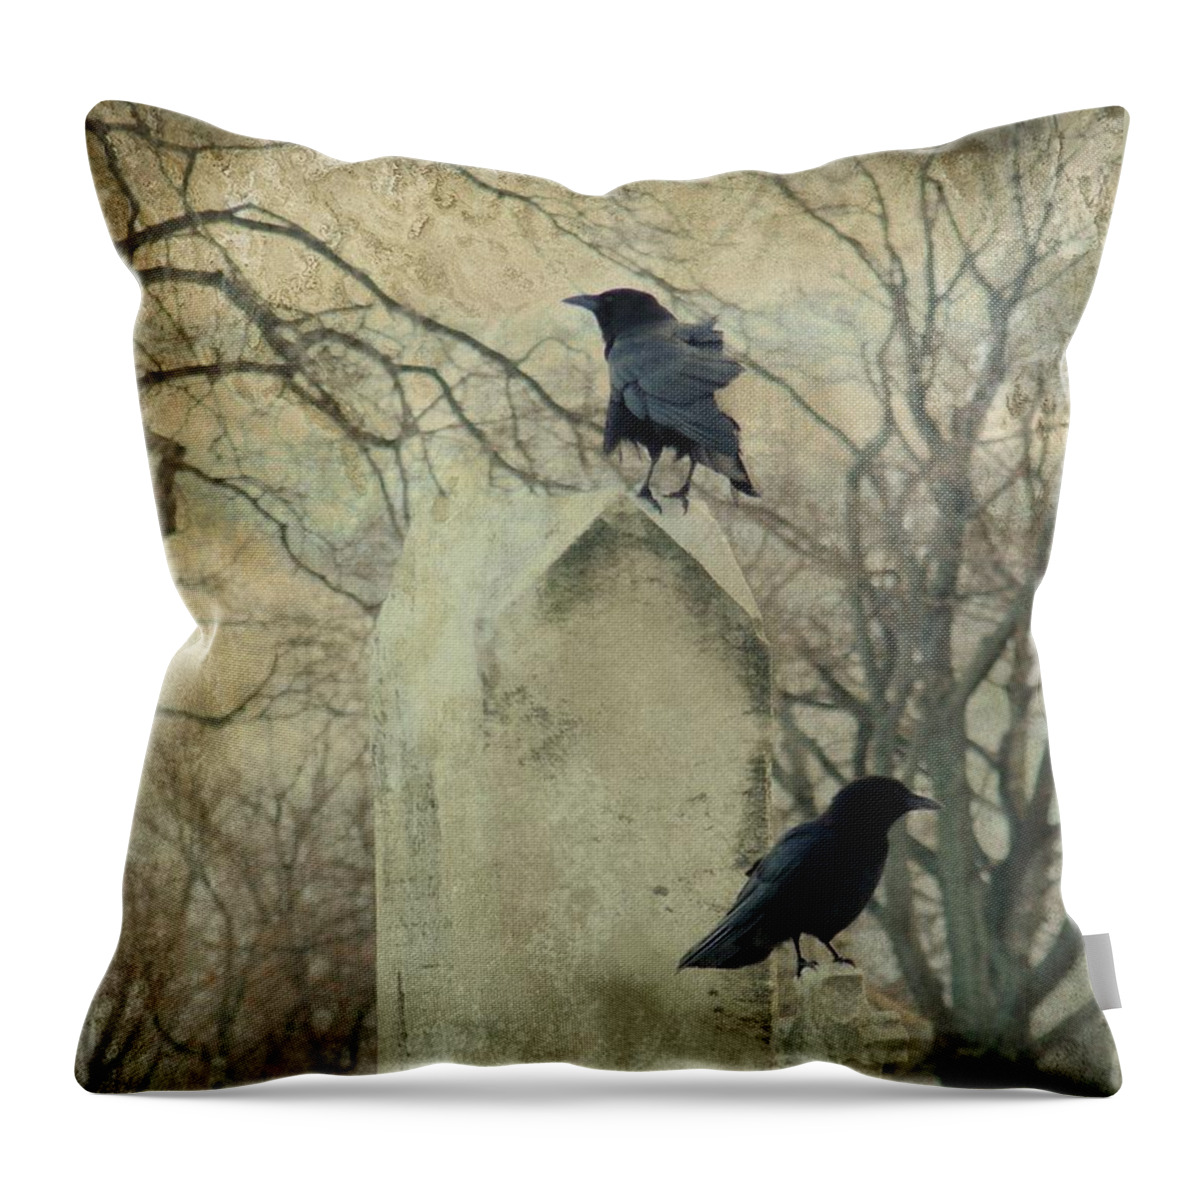 Aged Crow Image Throw Pillow featuring the photograph The Caretakers by Gothicrow Images